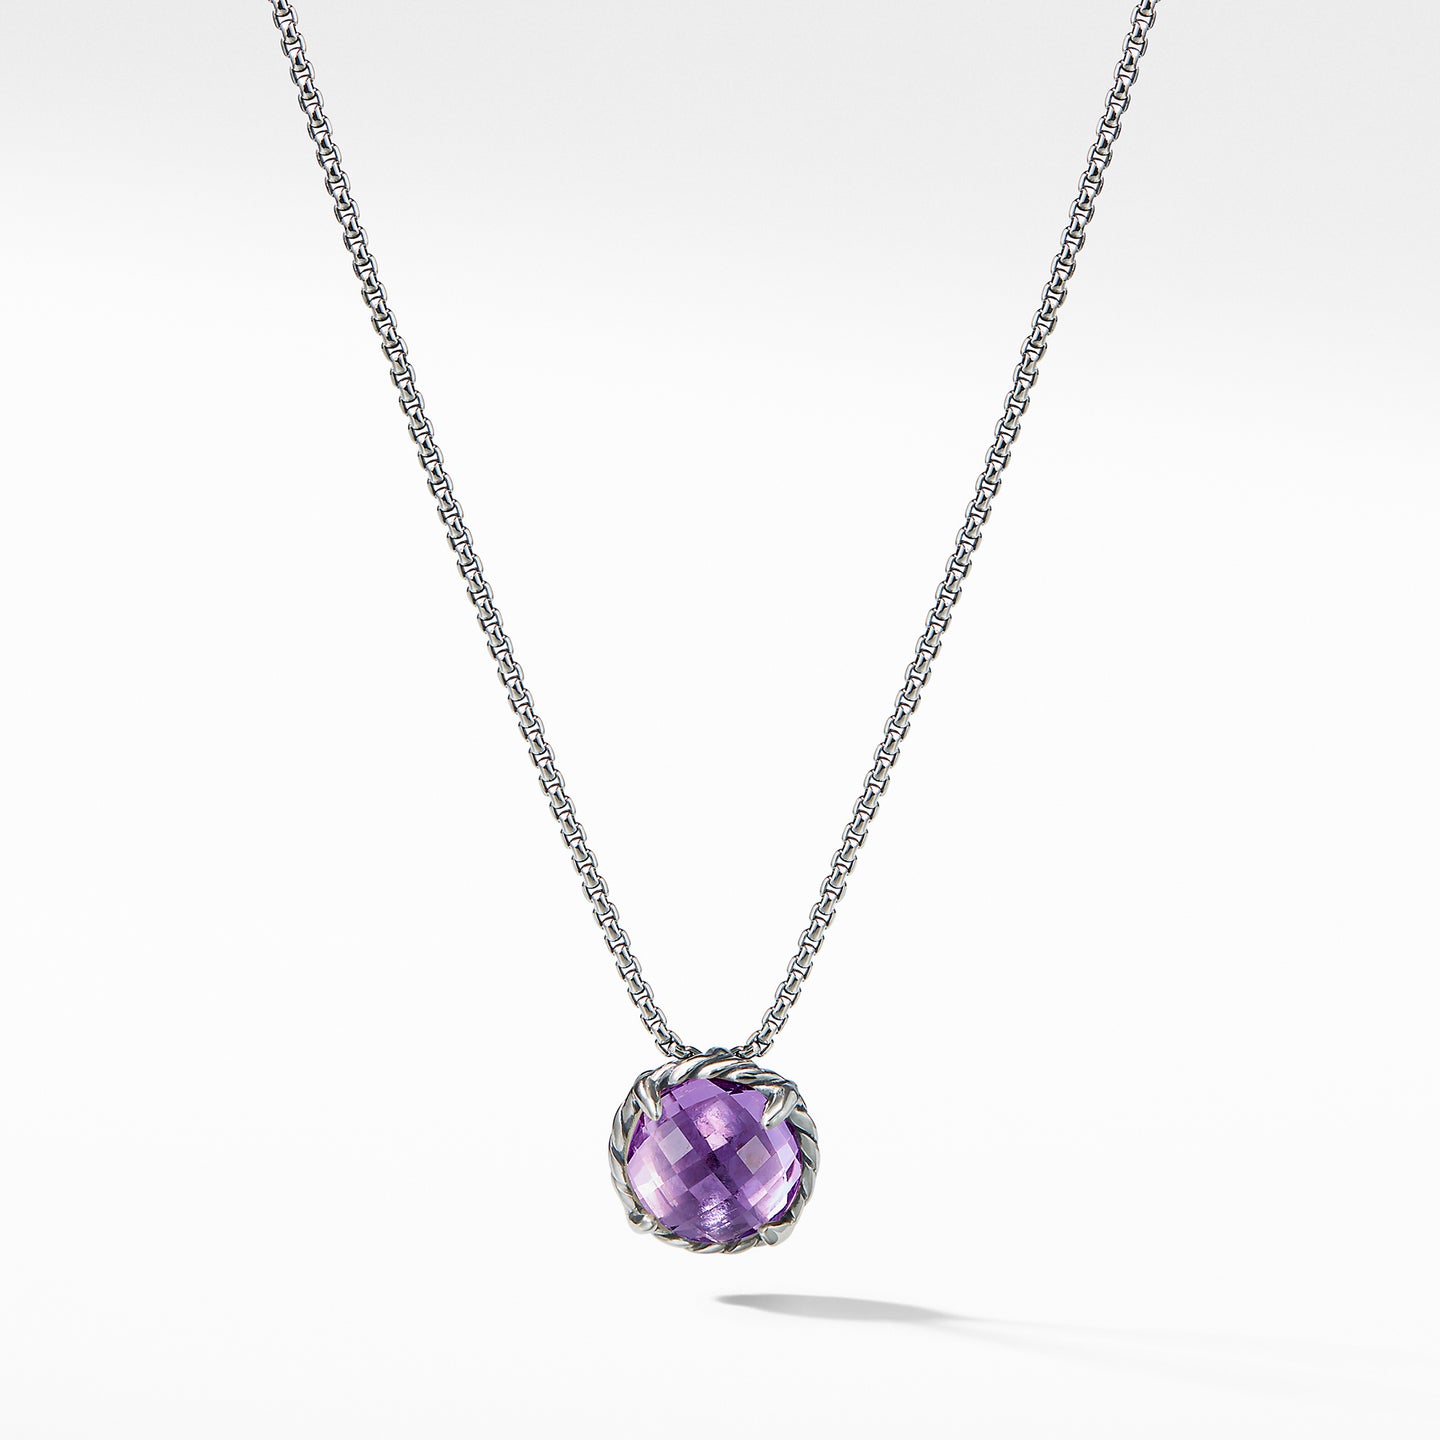 Châtelaine® Pendant Necklace with Amethyst, 17